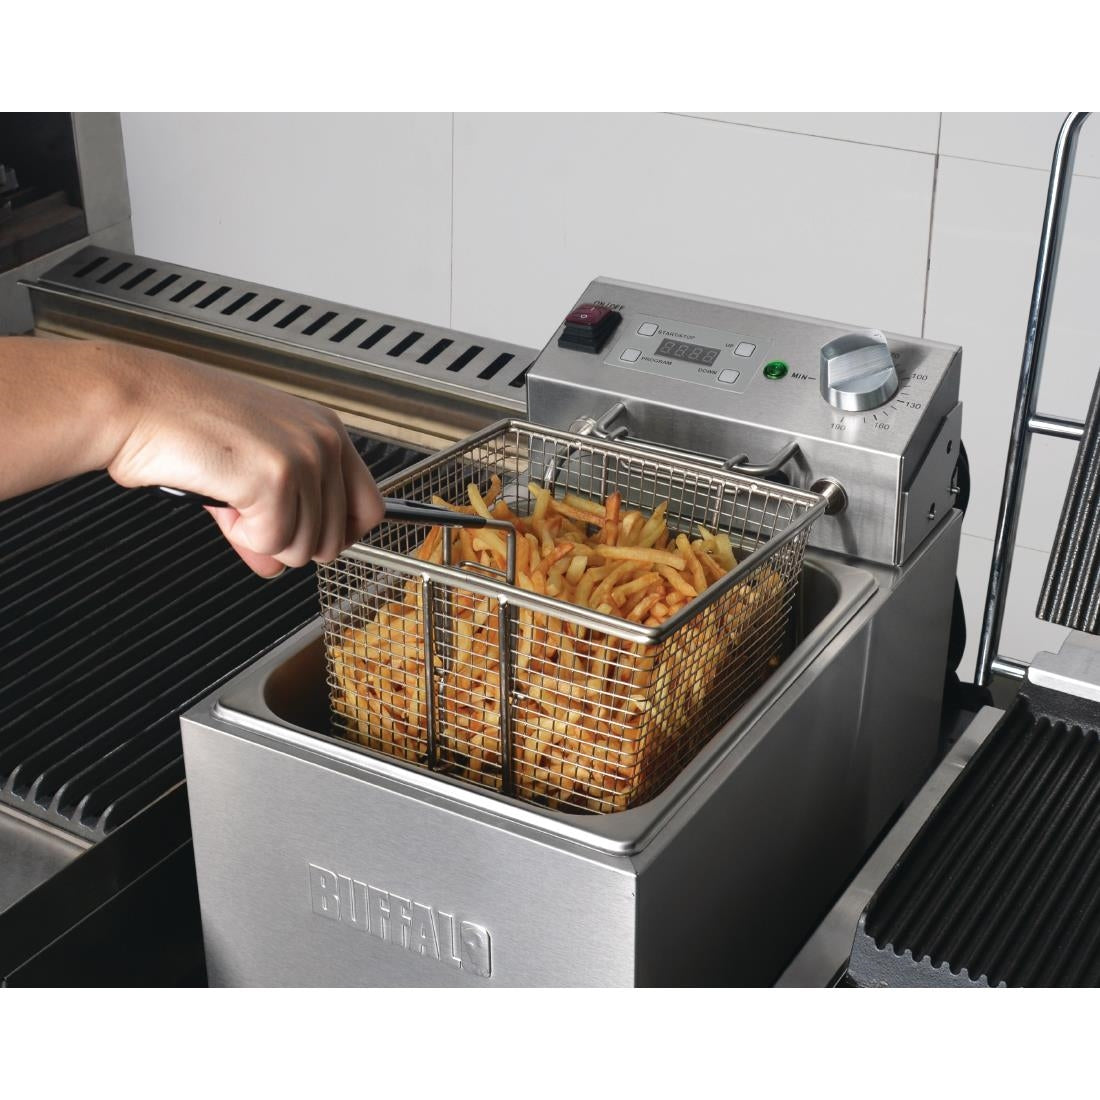 FC258 Buffalo Single Tank Single Basket 5Ltr Countertop Fryer with Timer 2.8kW JD Catering Equipment Solutions Ltd